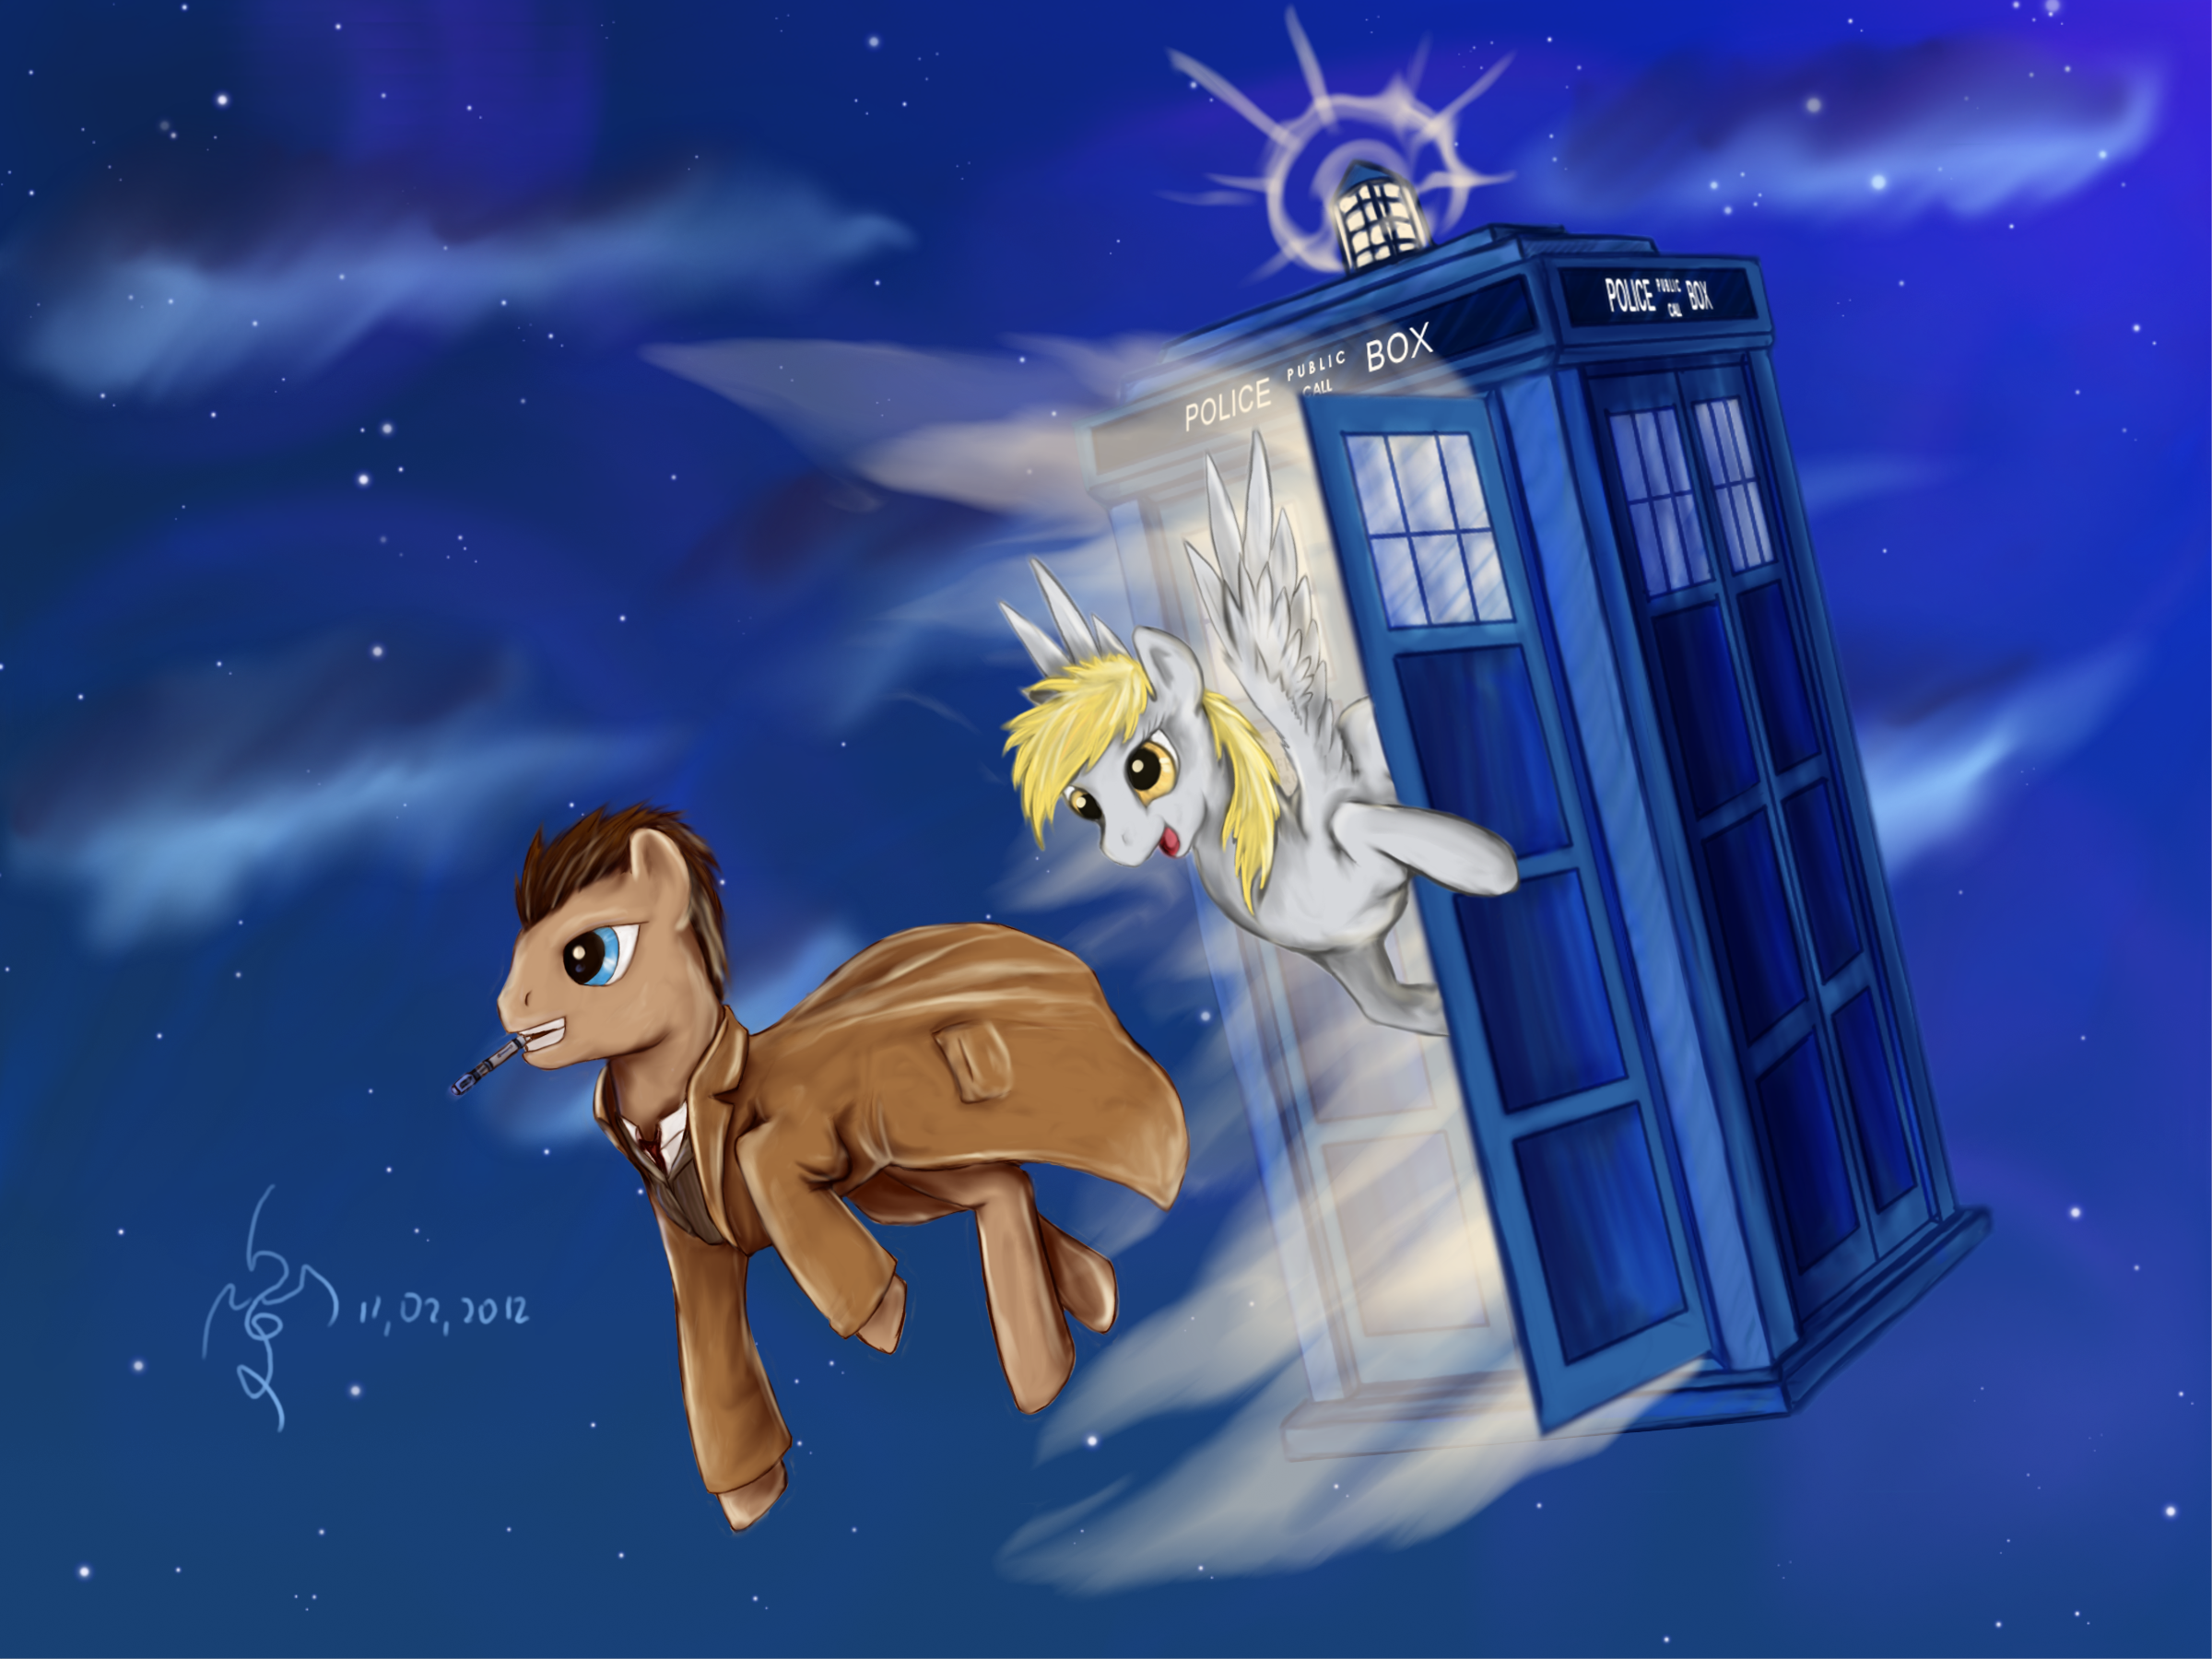 doctor Whooves time to adventure by Dalagar